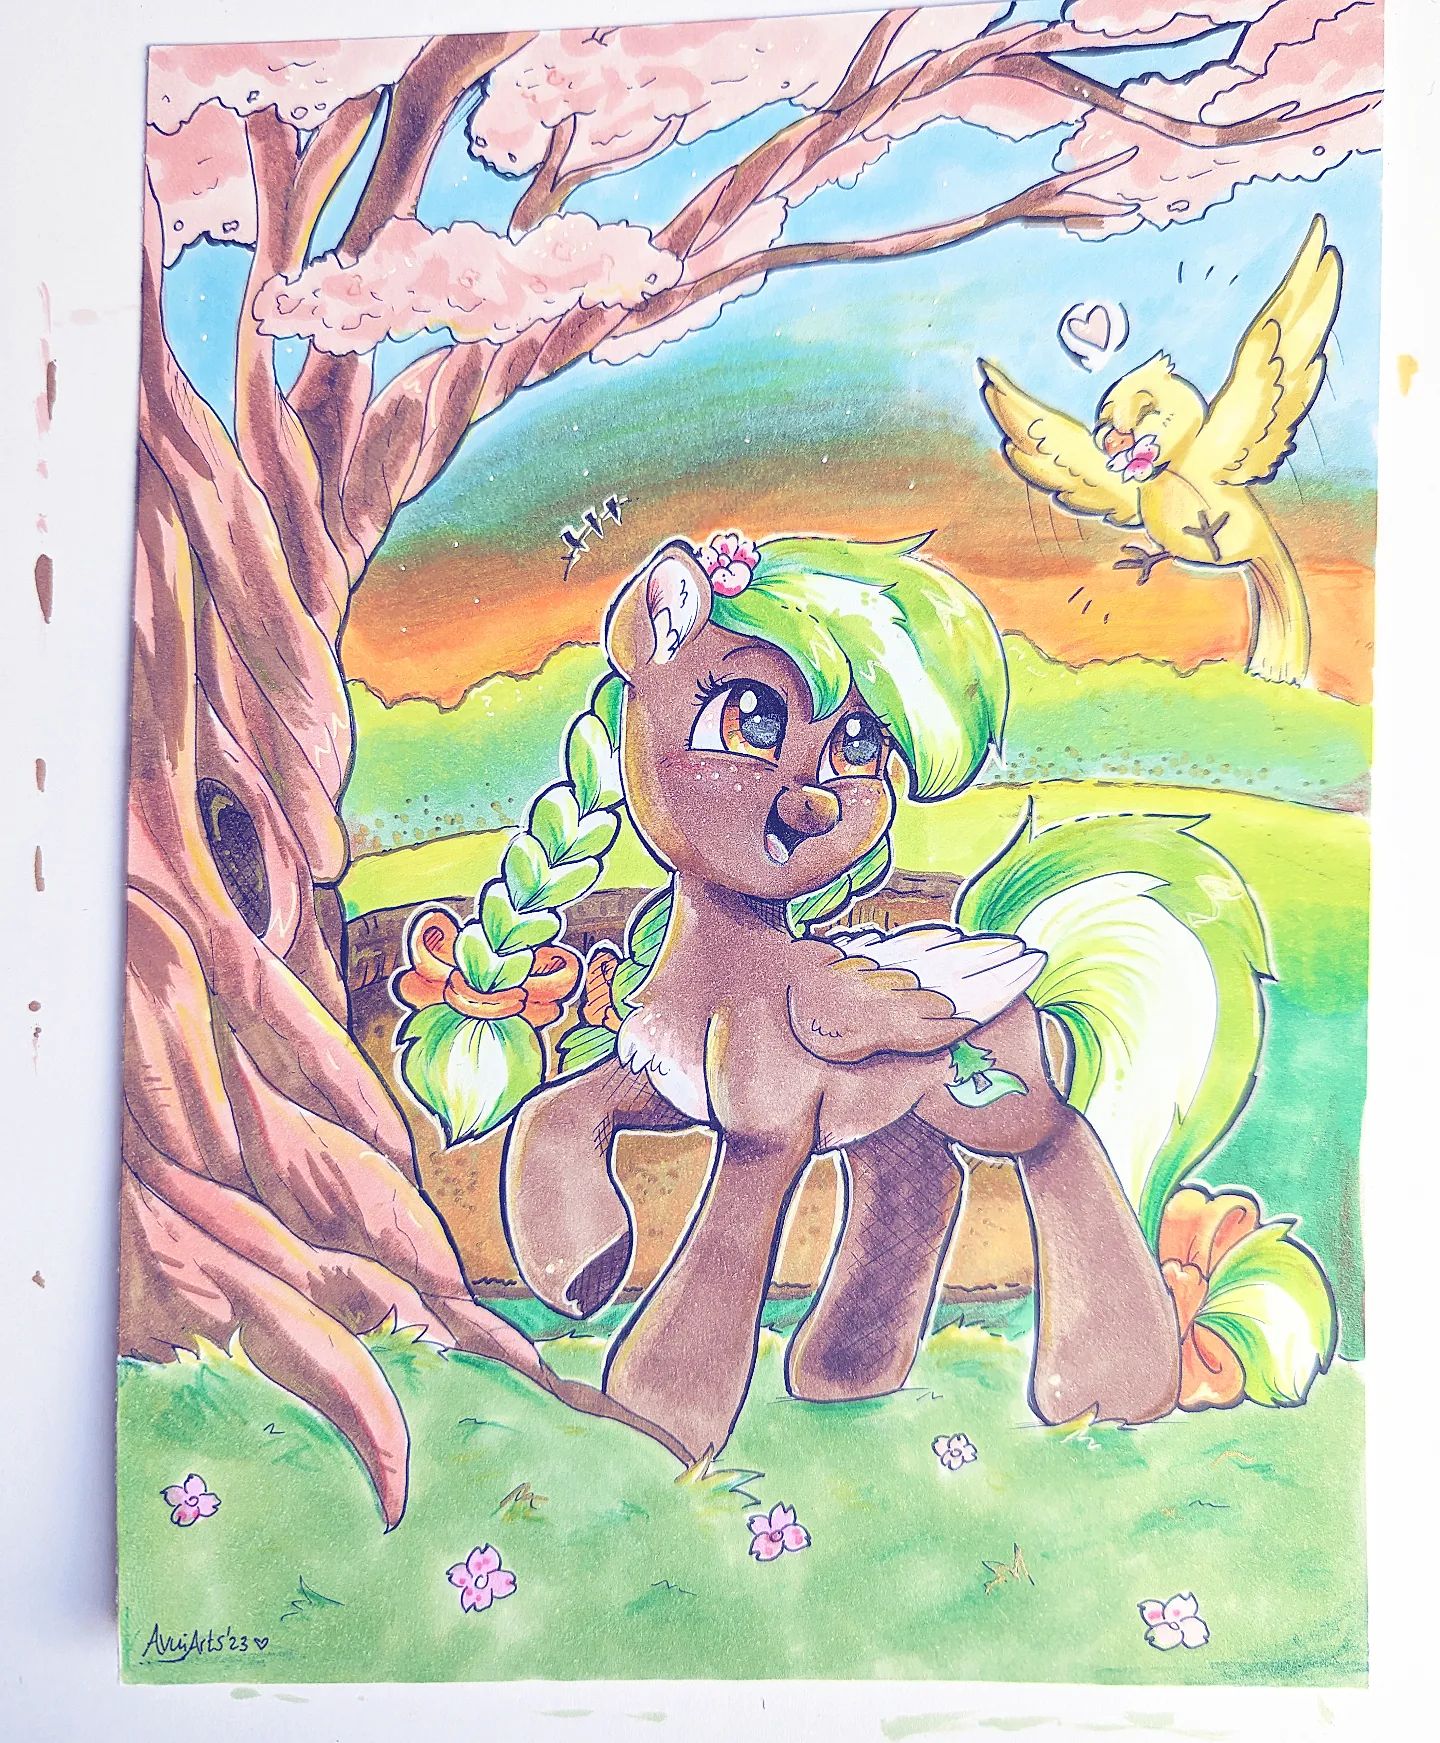 Traditional trade with Dandy bouquet !
#mlp #mylittlepony #brony